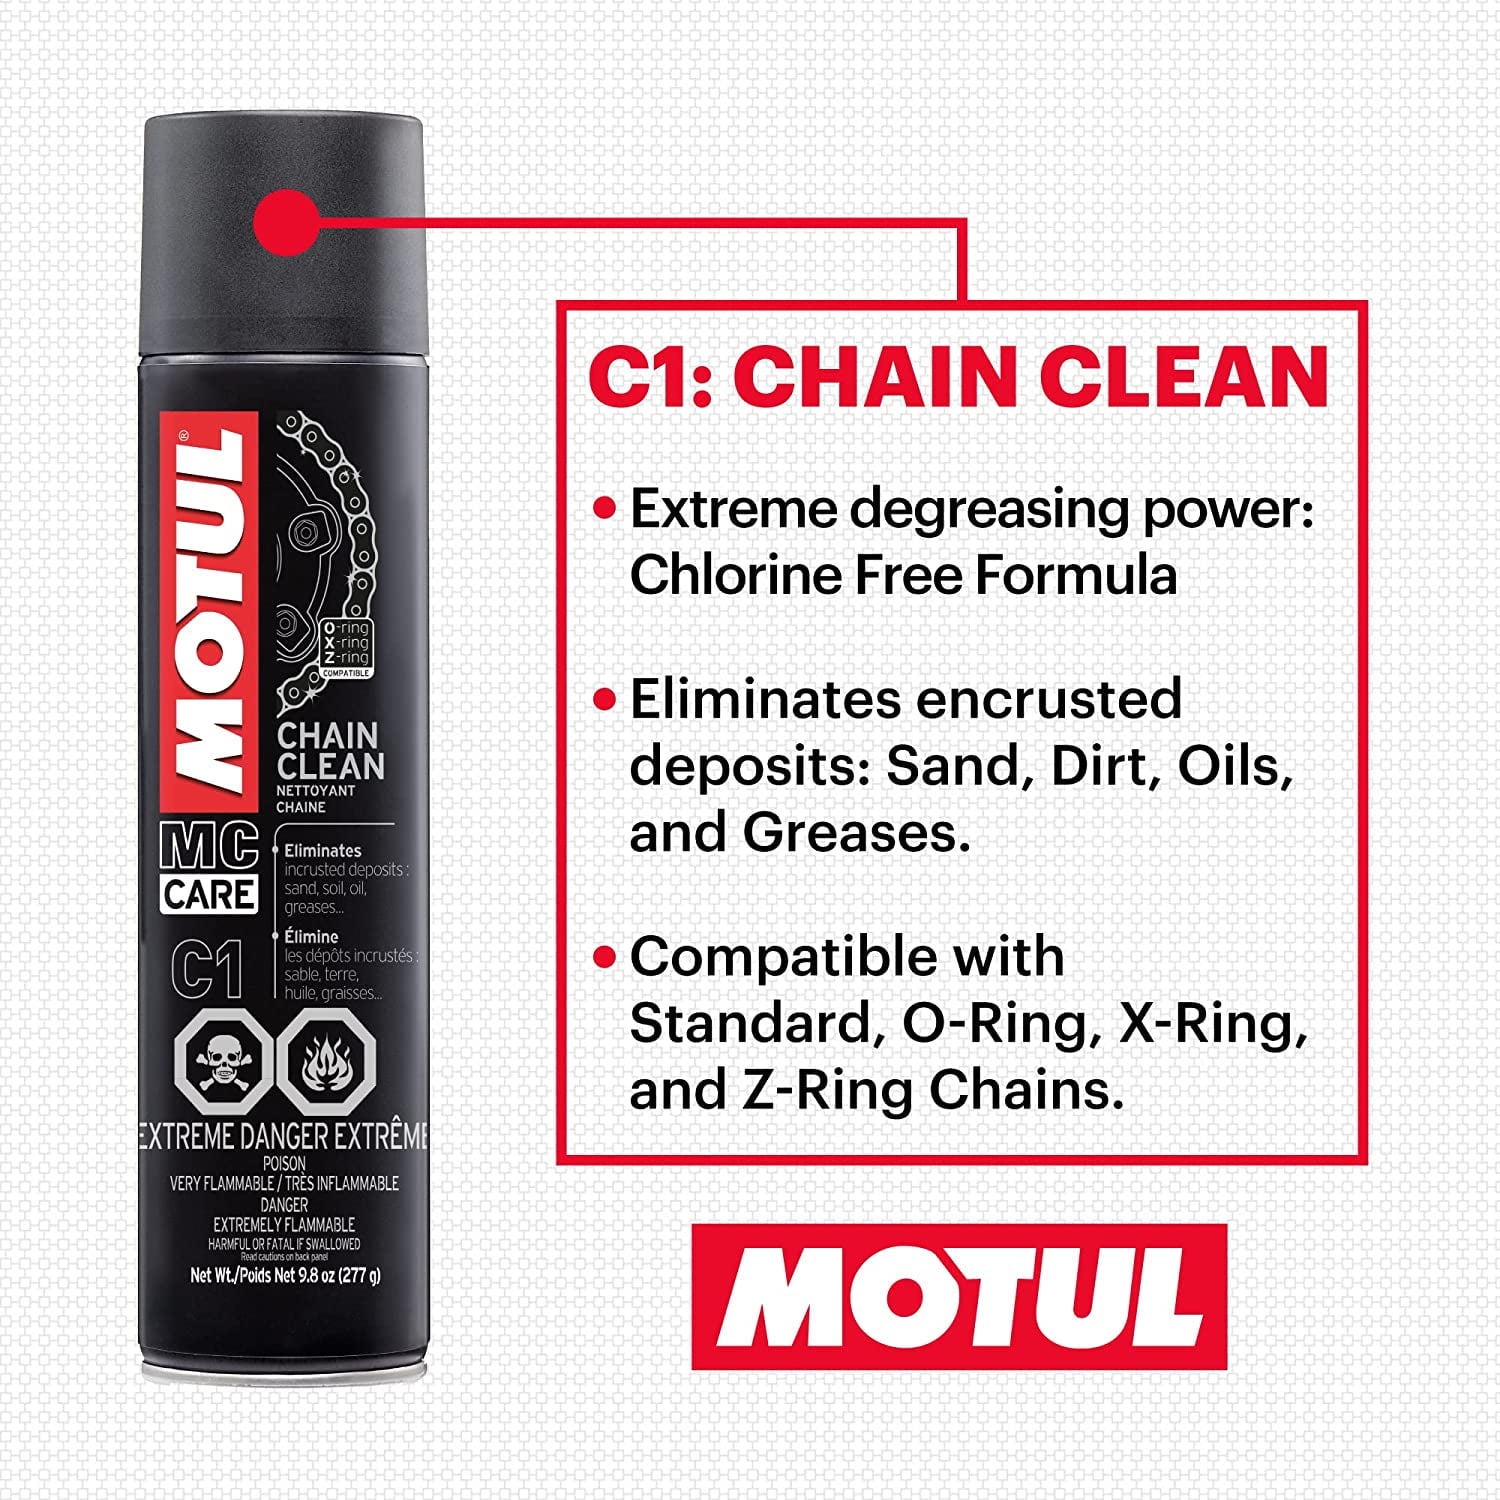 MOTUL 109767 Motorcycle Chain Clean Lube Kit C1 C2 Complete MC Care System  